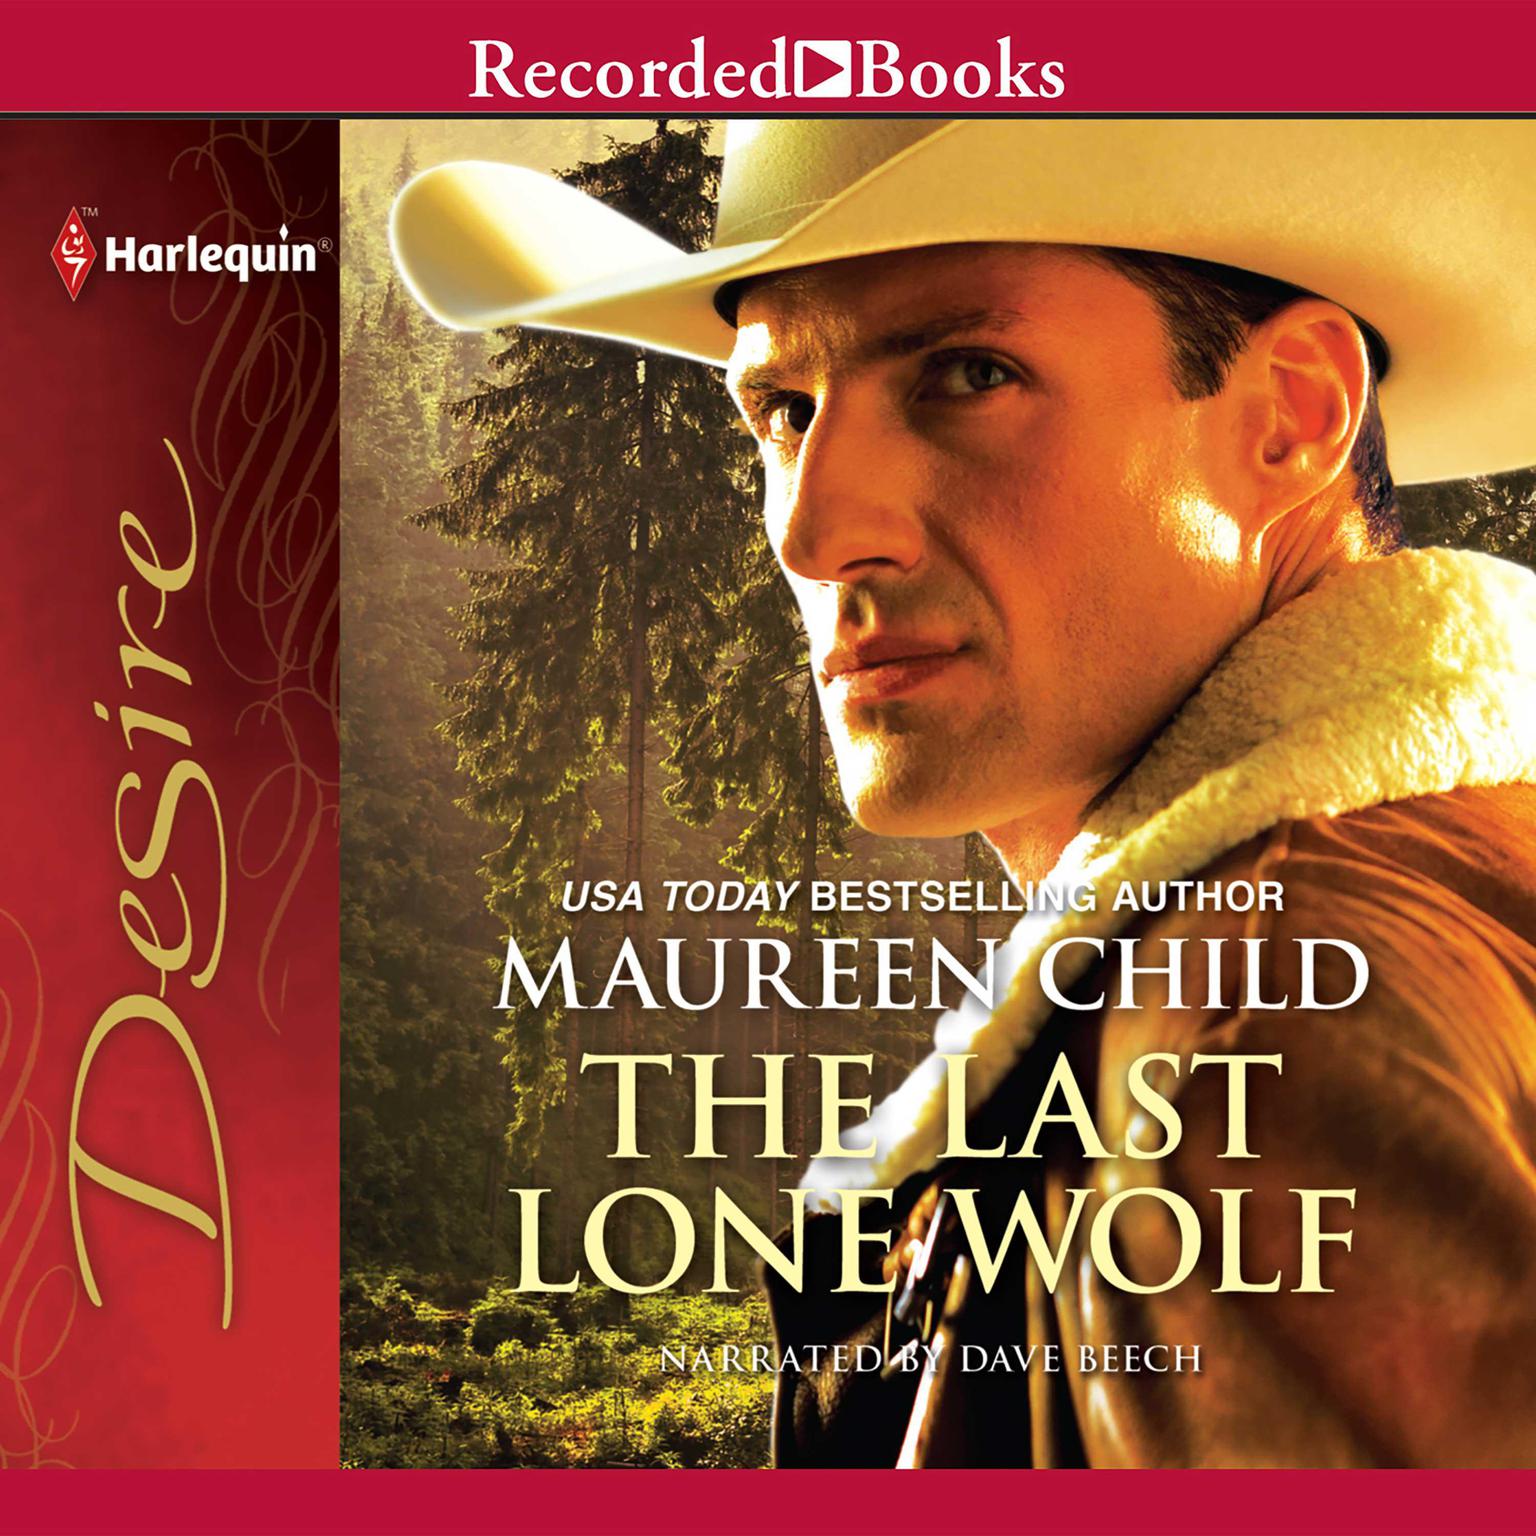 The Last Lone Wolf Audiobook, by Maureen Child